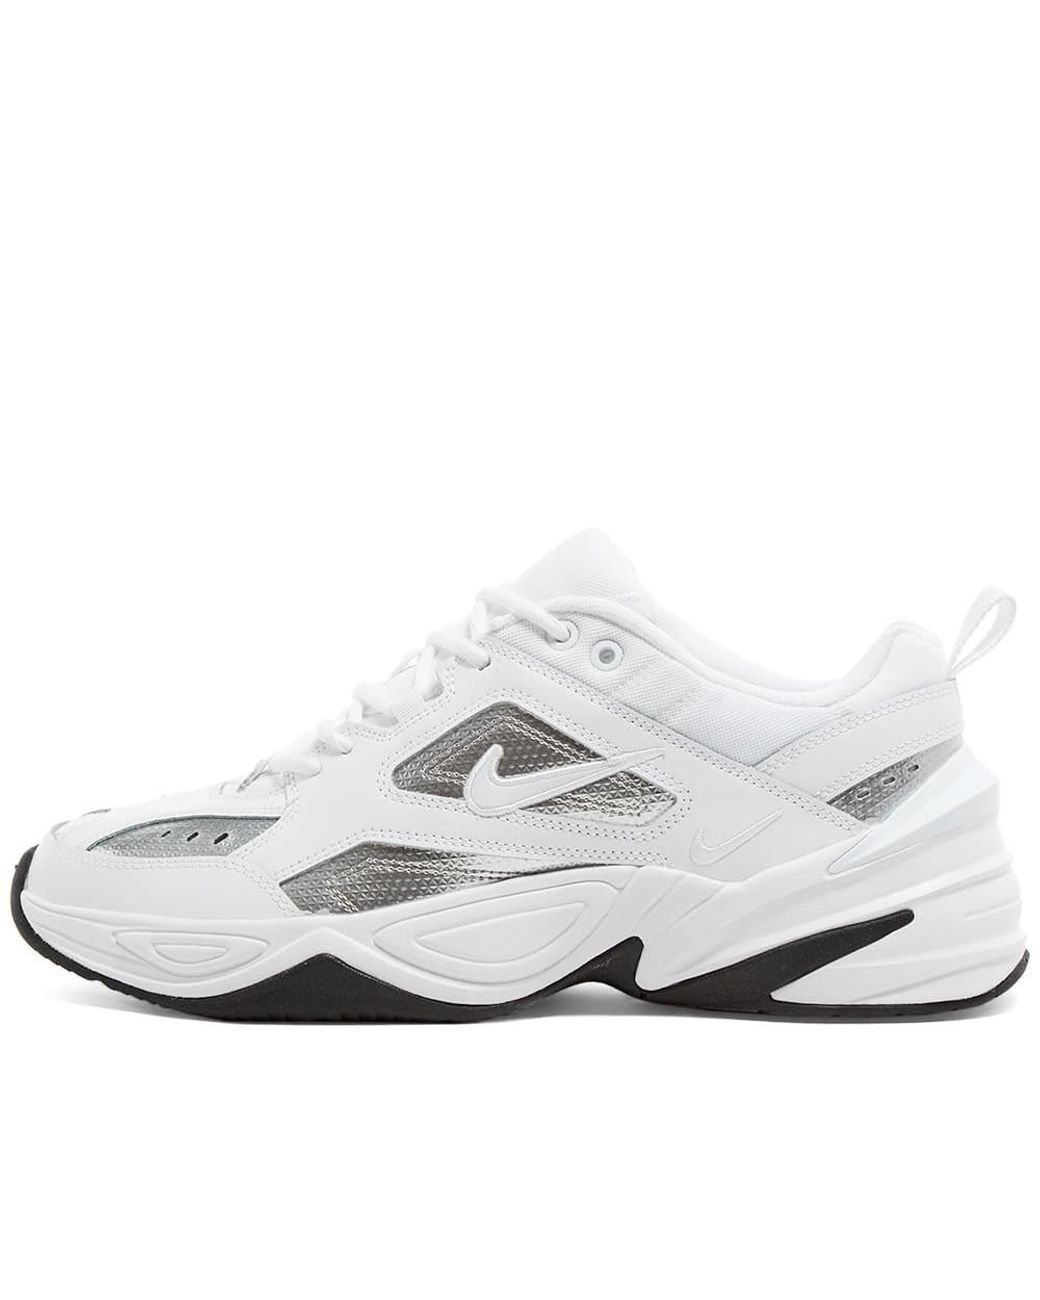 Rich man Advent fish Nike White & Silver M2k Tekno Trainers | Lyst